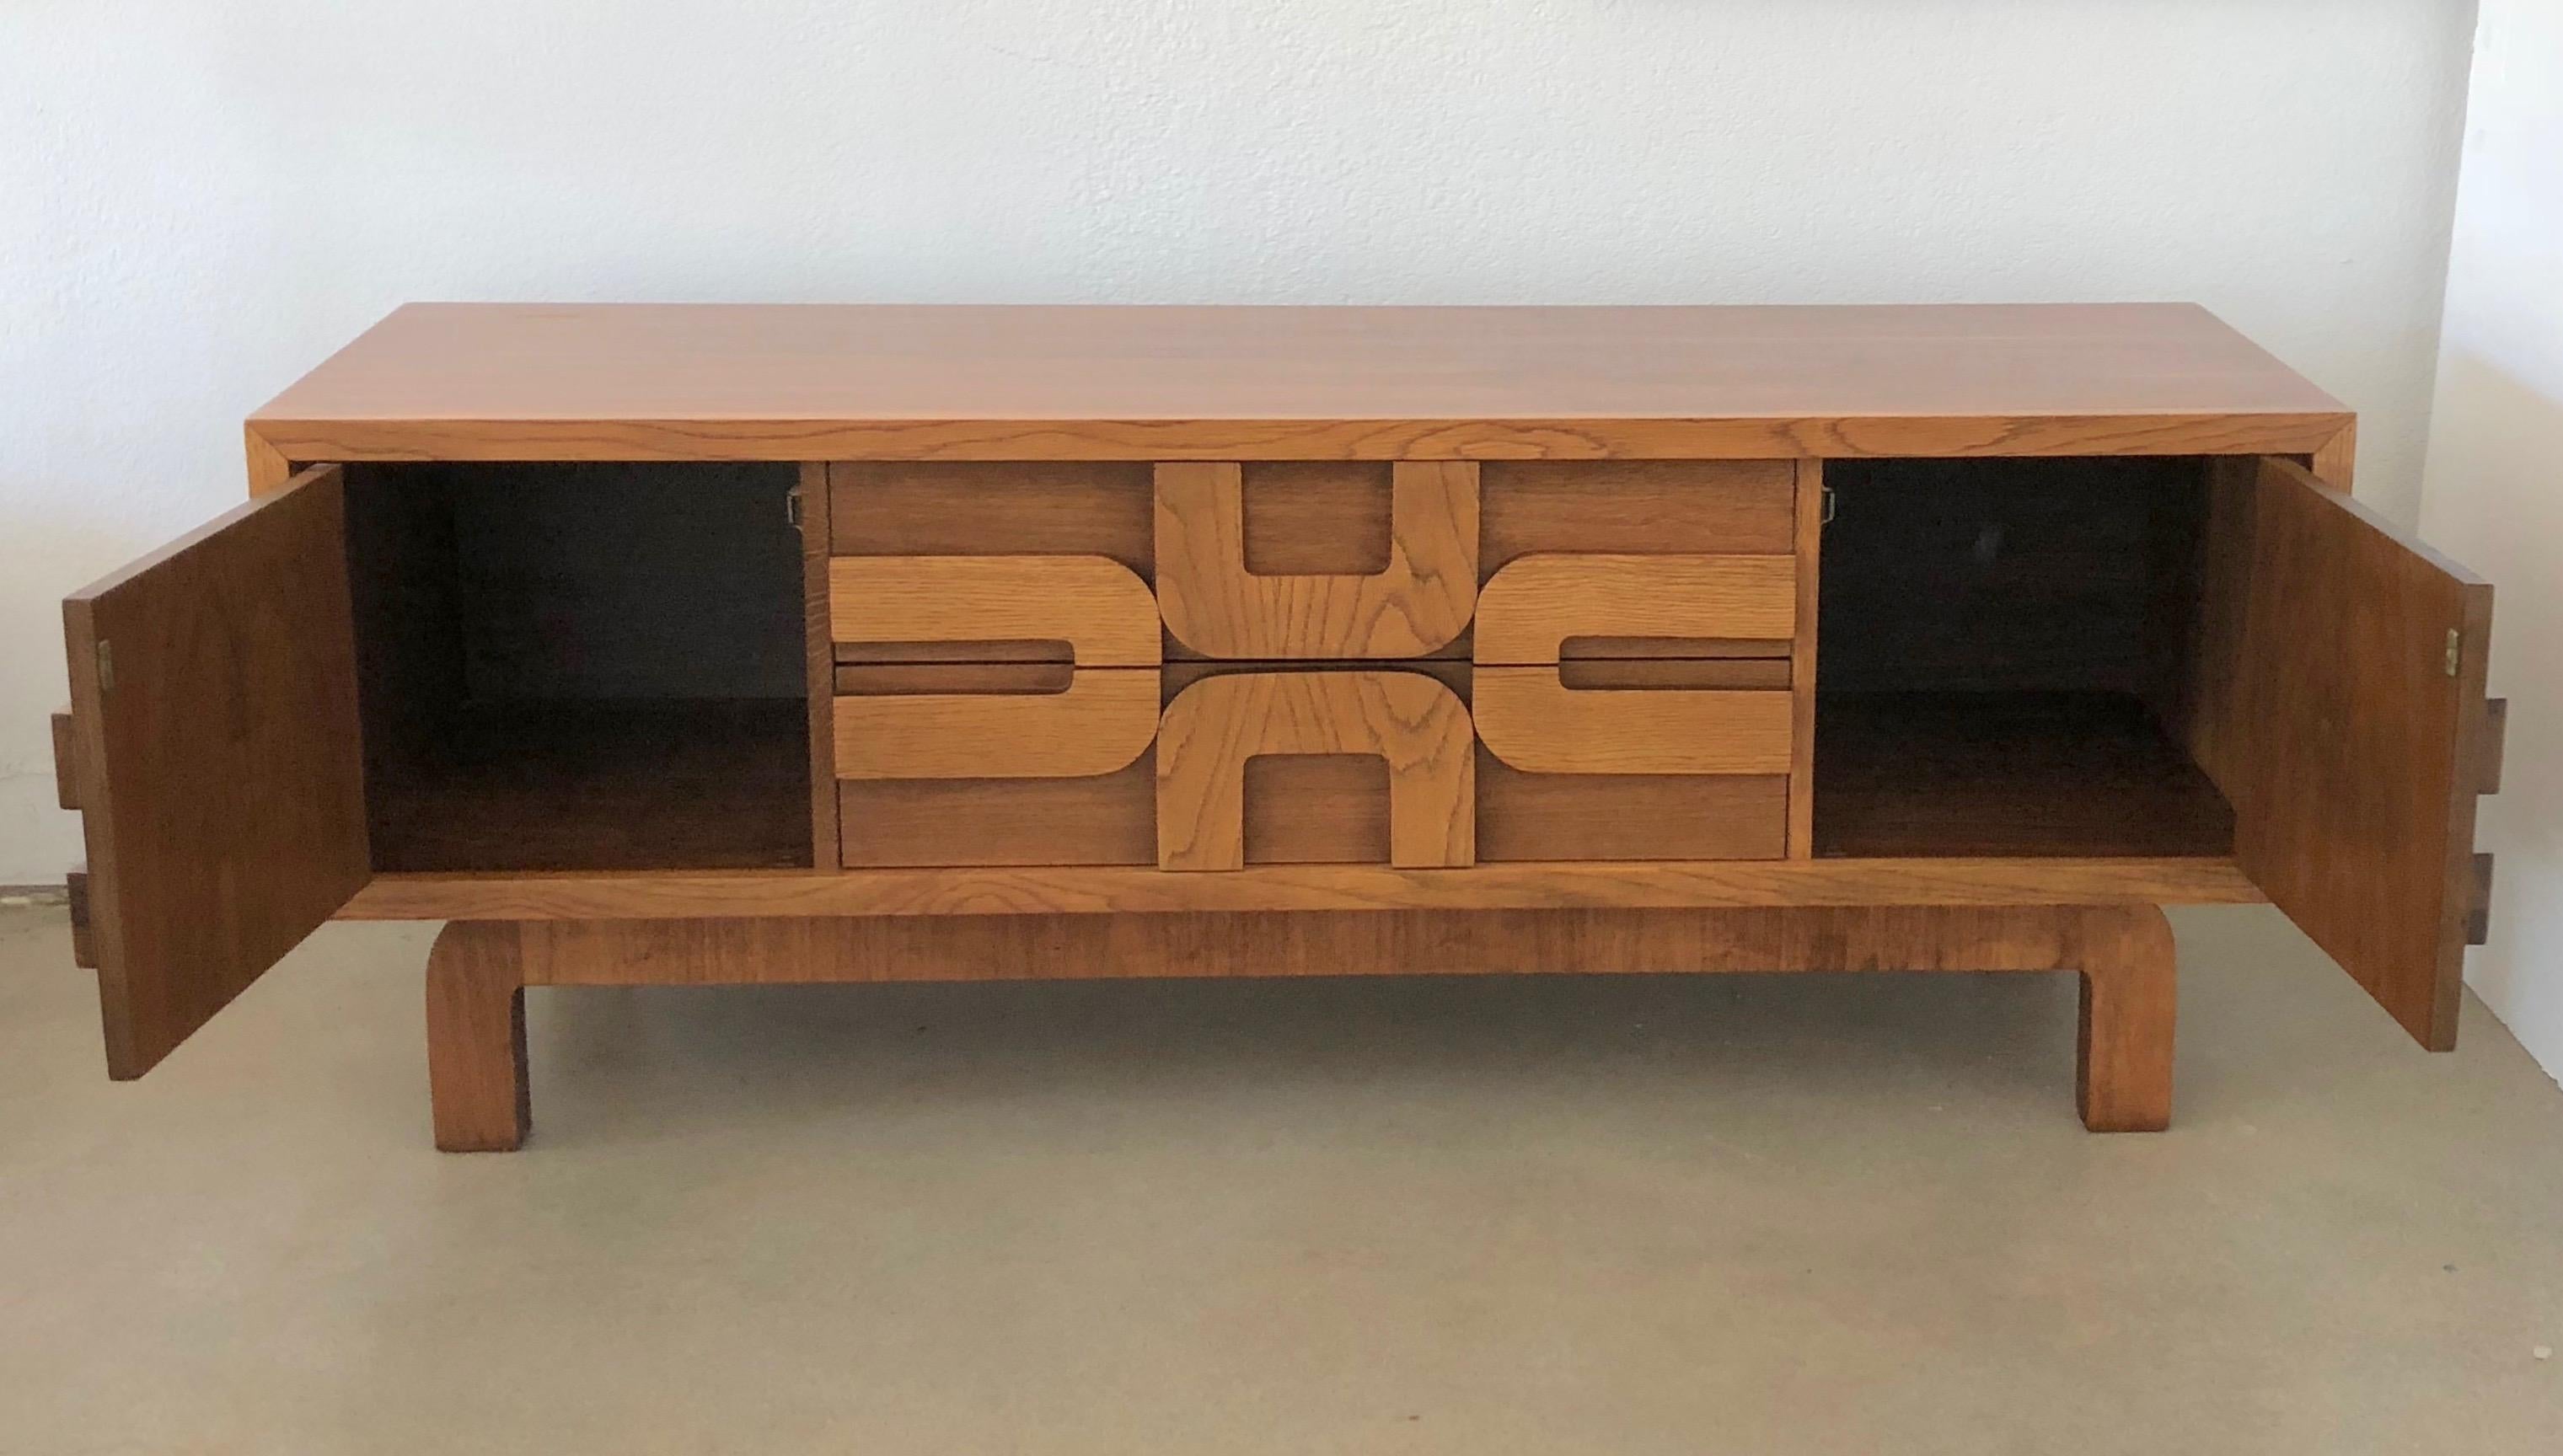 This low Brutalist Lane cabinet has a beautiful walnut grain. The scale and proportions of this piece work well for media storage, or behind a sofa or at the foot of a bed.
The cabinet retains its original paper tags. There are two doors on either